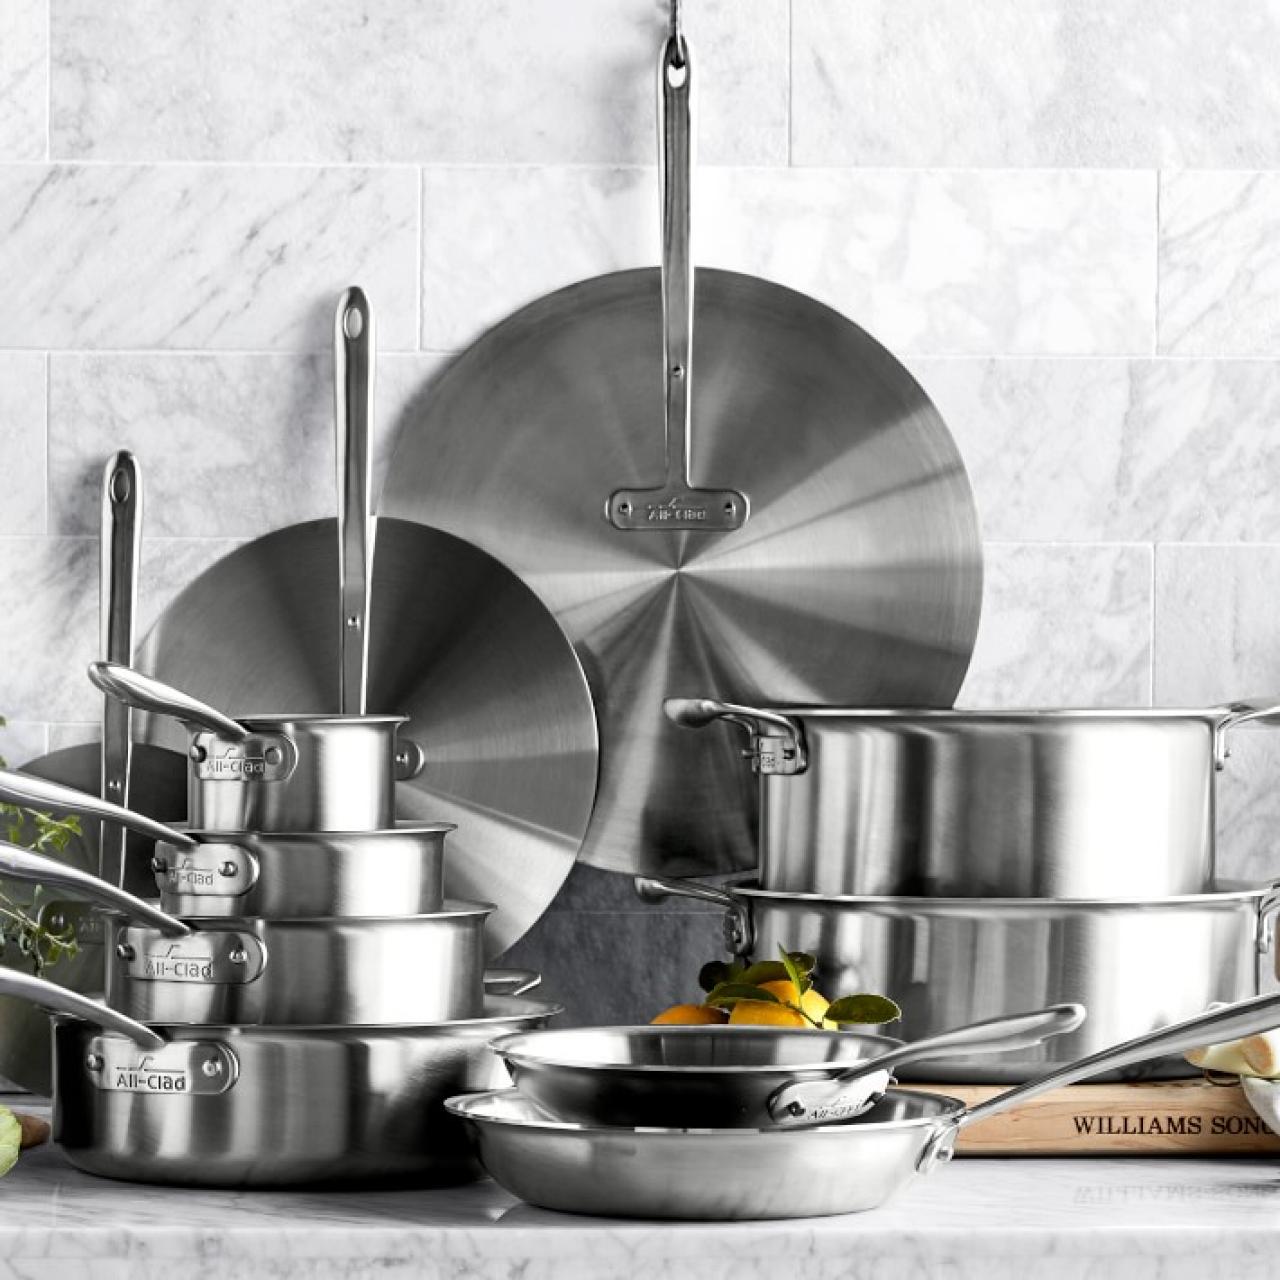 All-Clad factory sale: Save on All-Clad cookware sets, pots, pans, and more